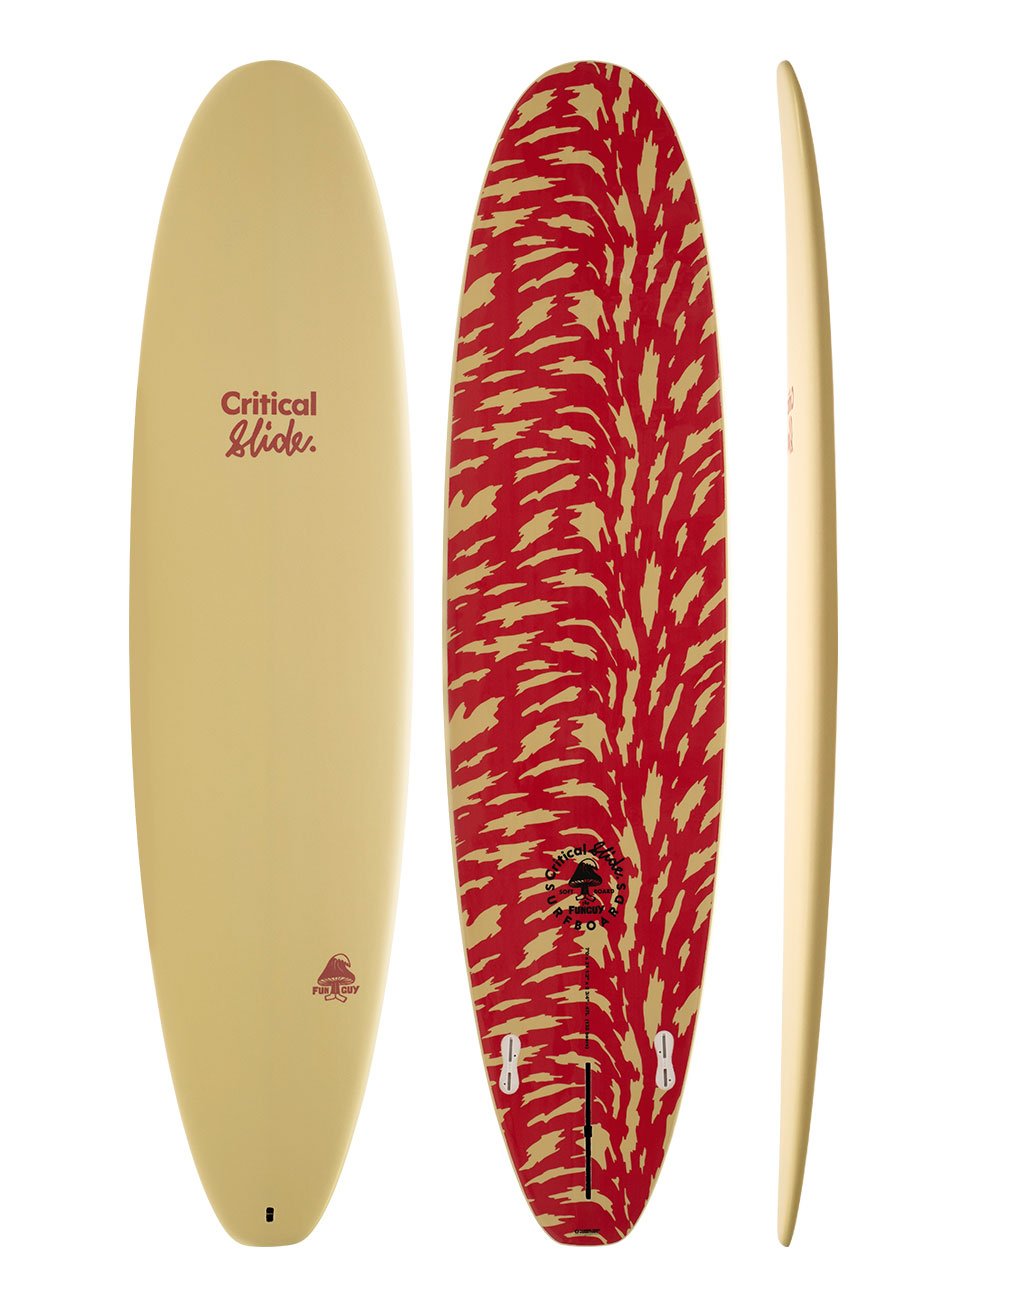 The Critical Slide Society Surfboards Fun Guy - beige and red colored longboard